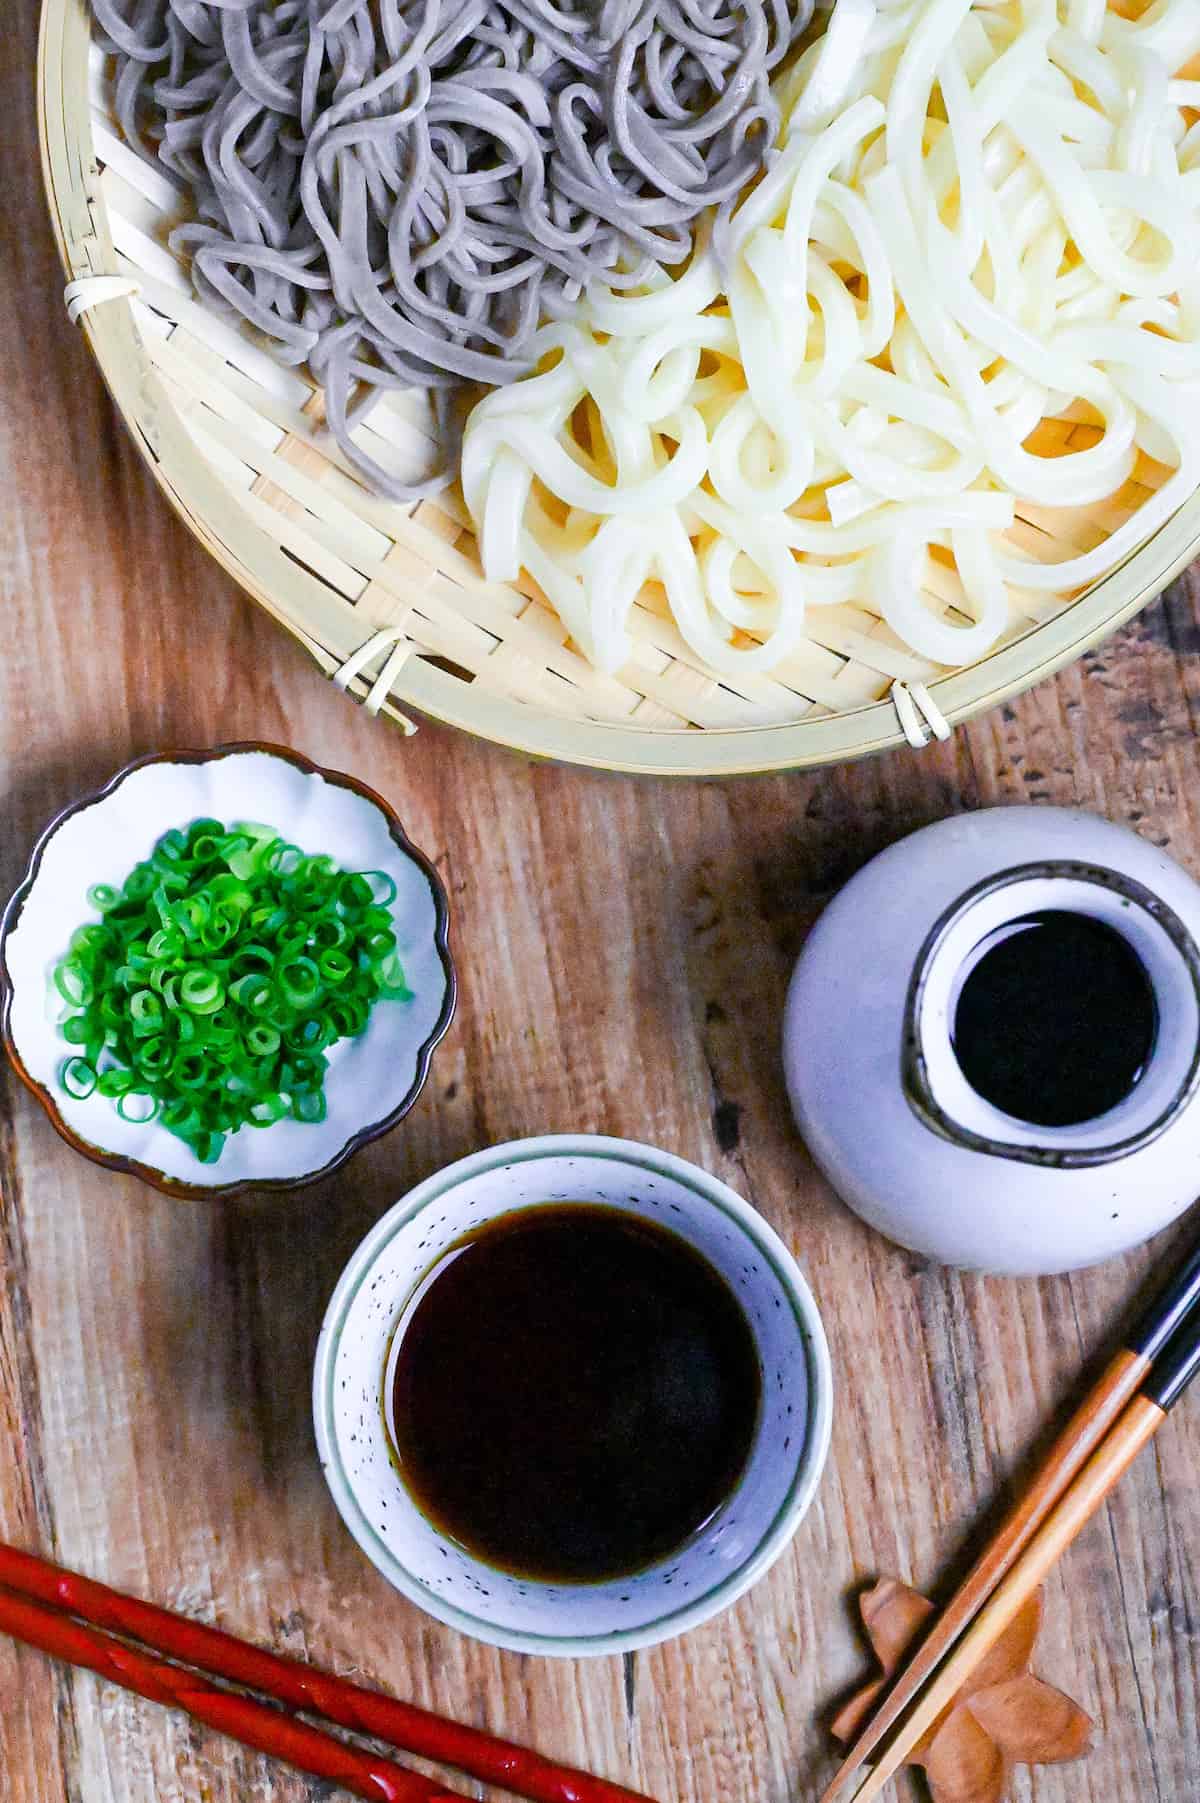 homemade mentsuyu (Japanese noodle dipping sauce) in a white dipping bowl next to a jug of sauce and a tray of udon and soba noodles